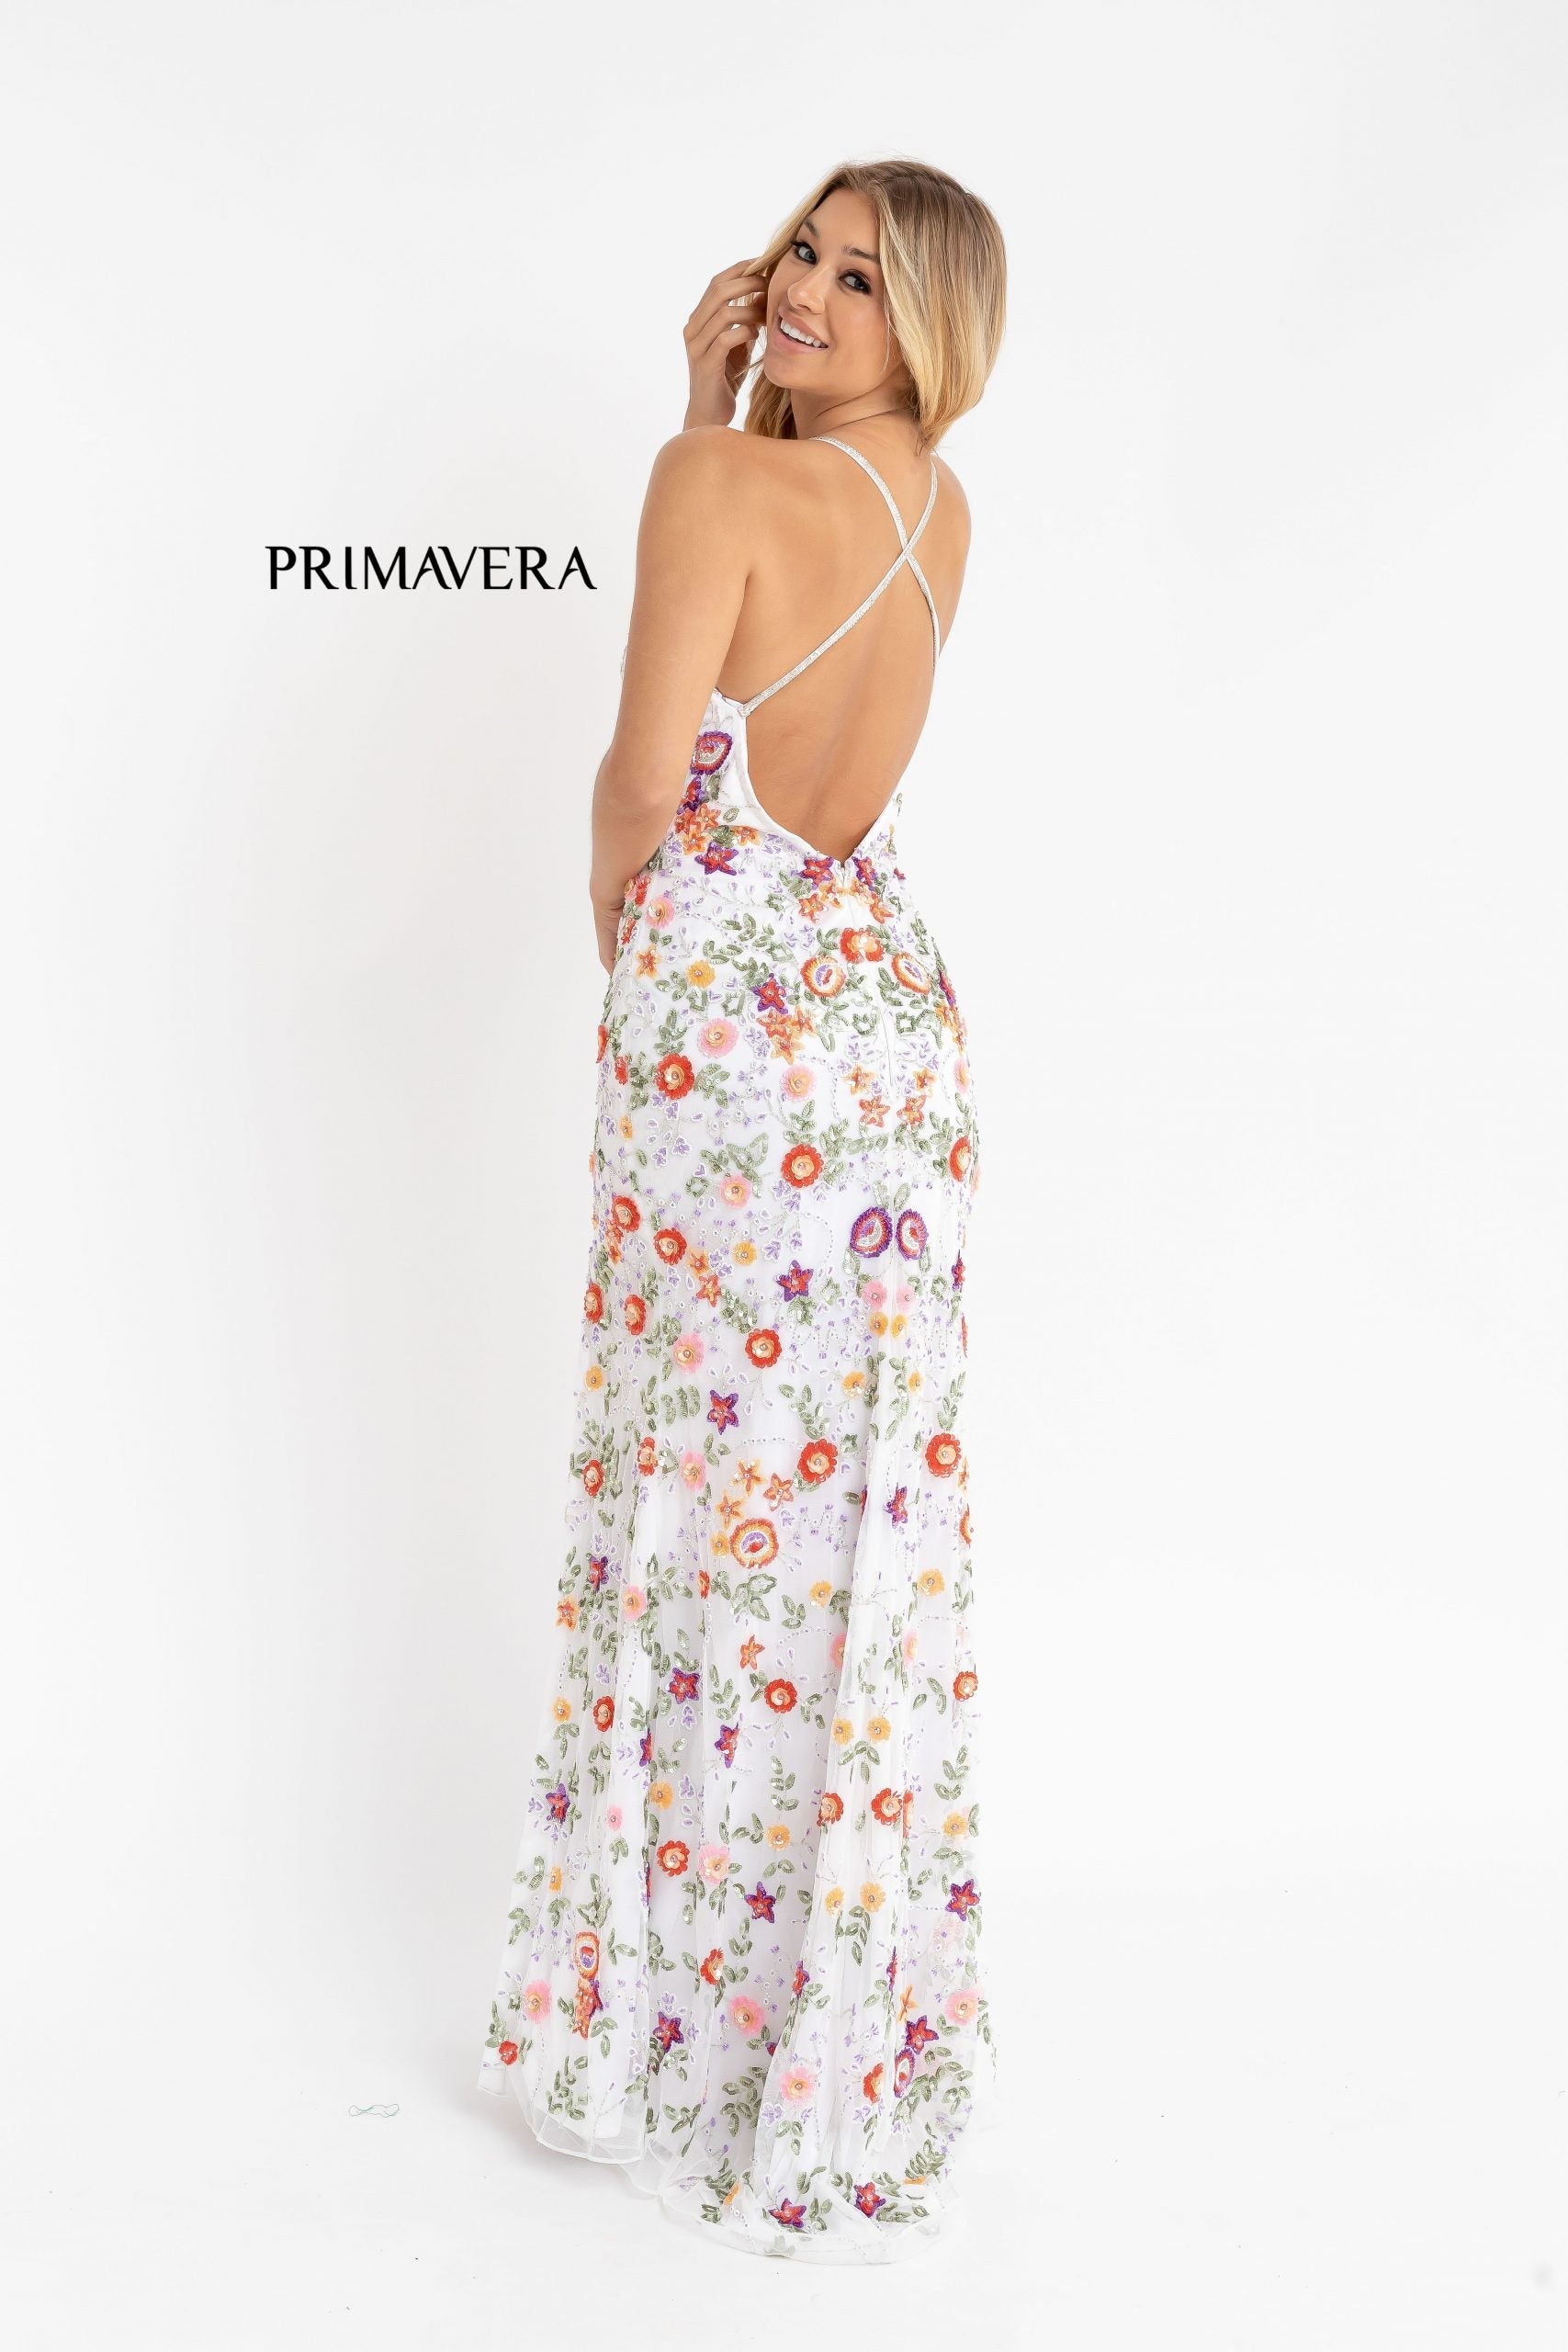 Primavera Couture 3073 Prom Dress Long beaded floral print evening